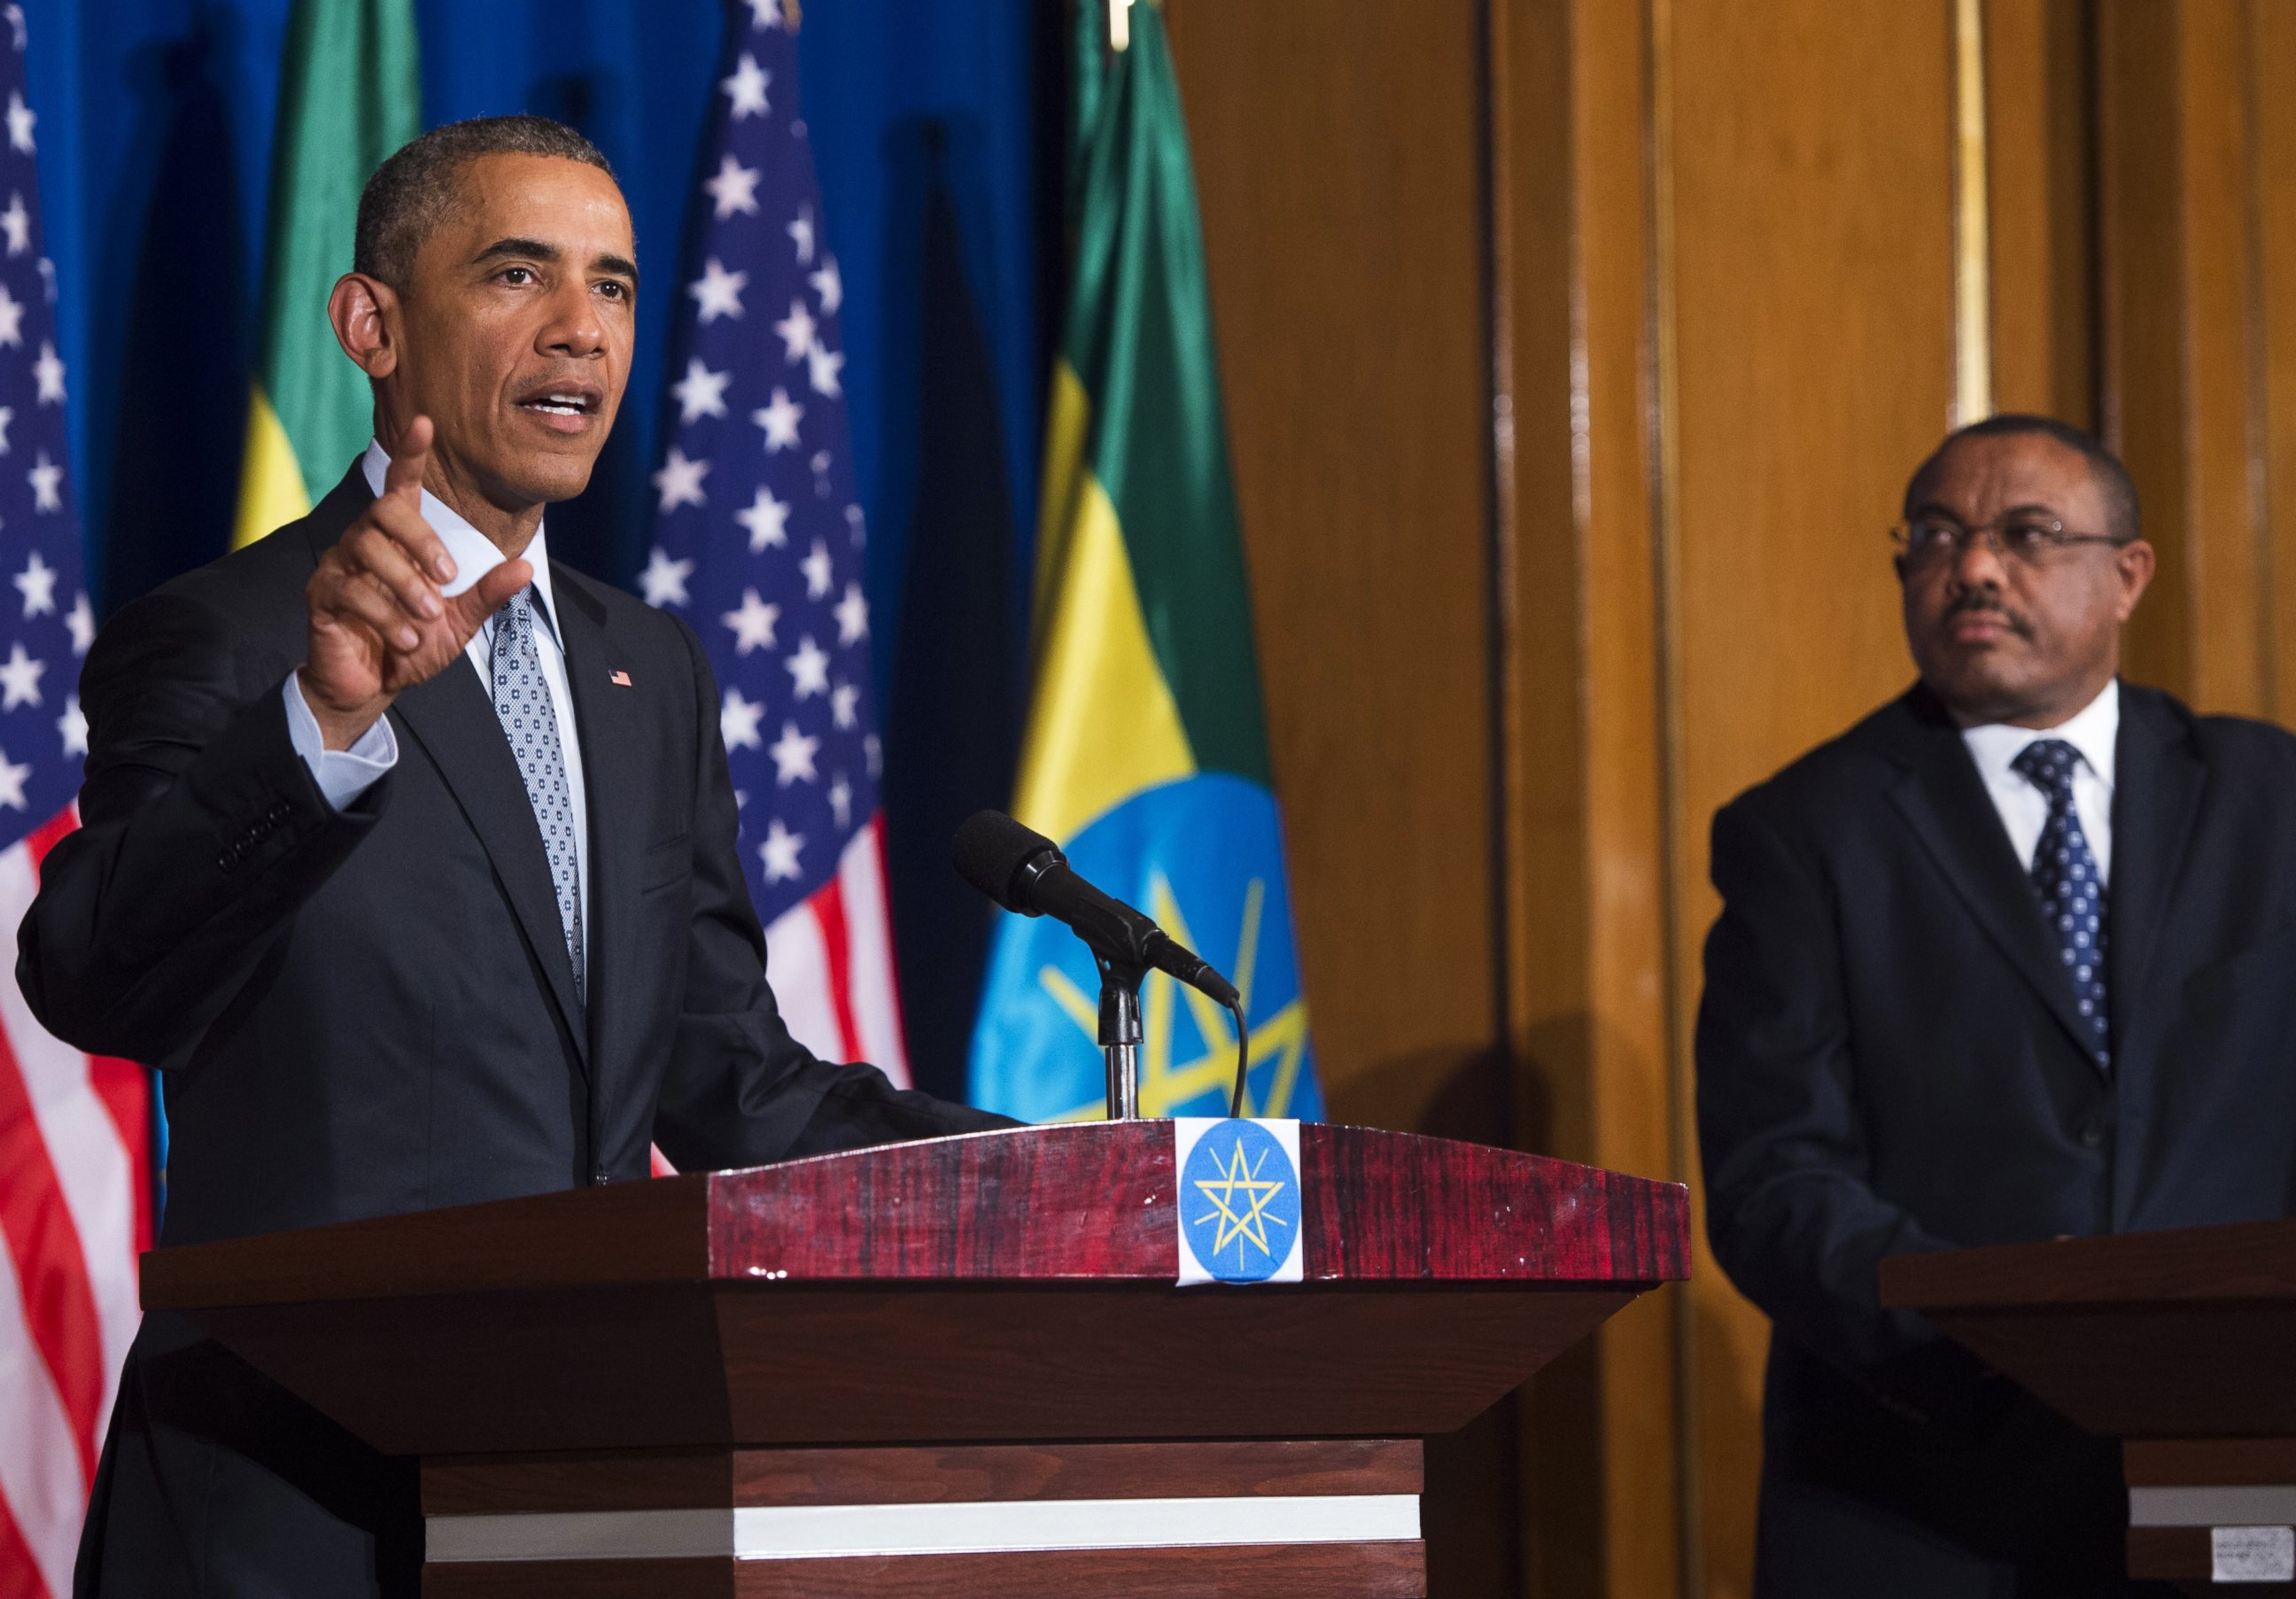 PHOTO: President Barack Obama speaks during a joint press conference with Ethiopian Prime Minister Hailemariam Desalegn at the National Palace, July 27, 2015, in Addis Ababa, Ethiopia.